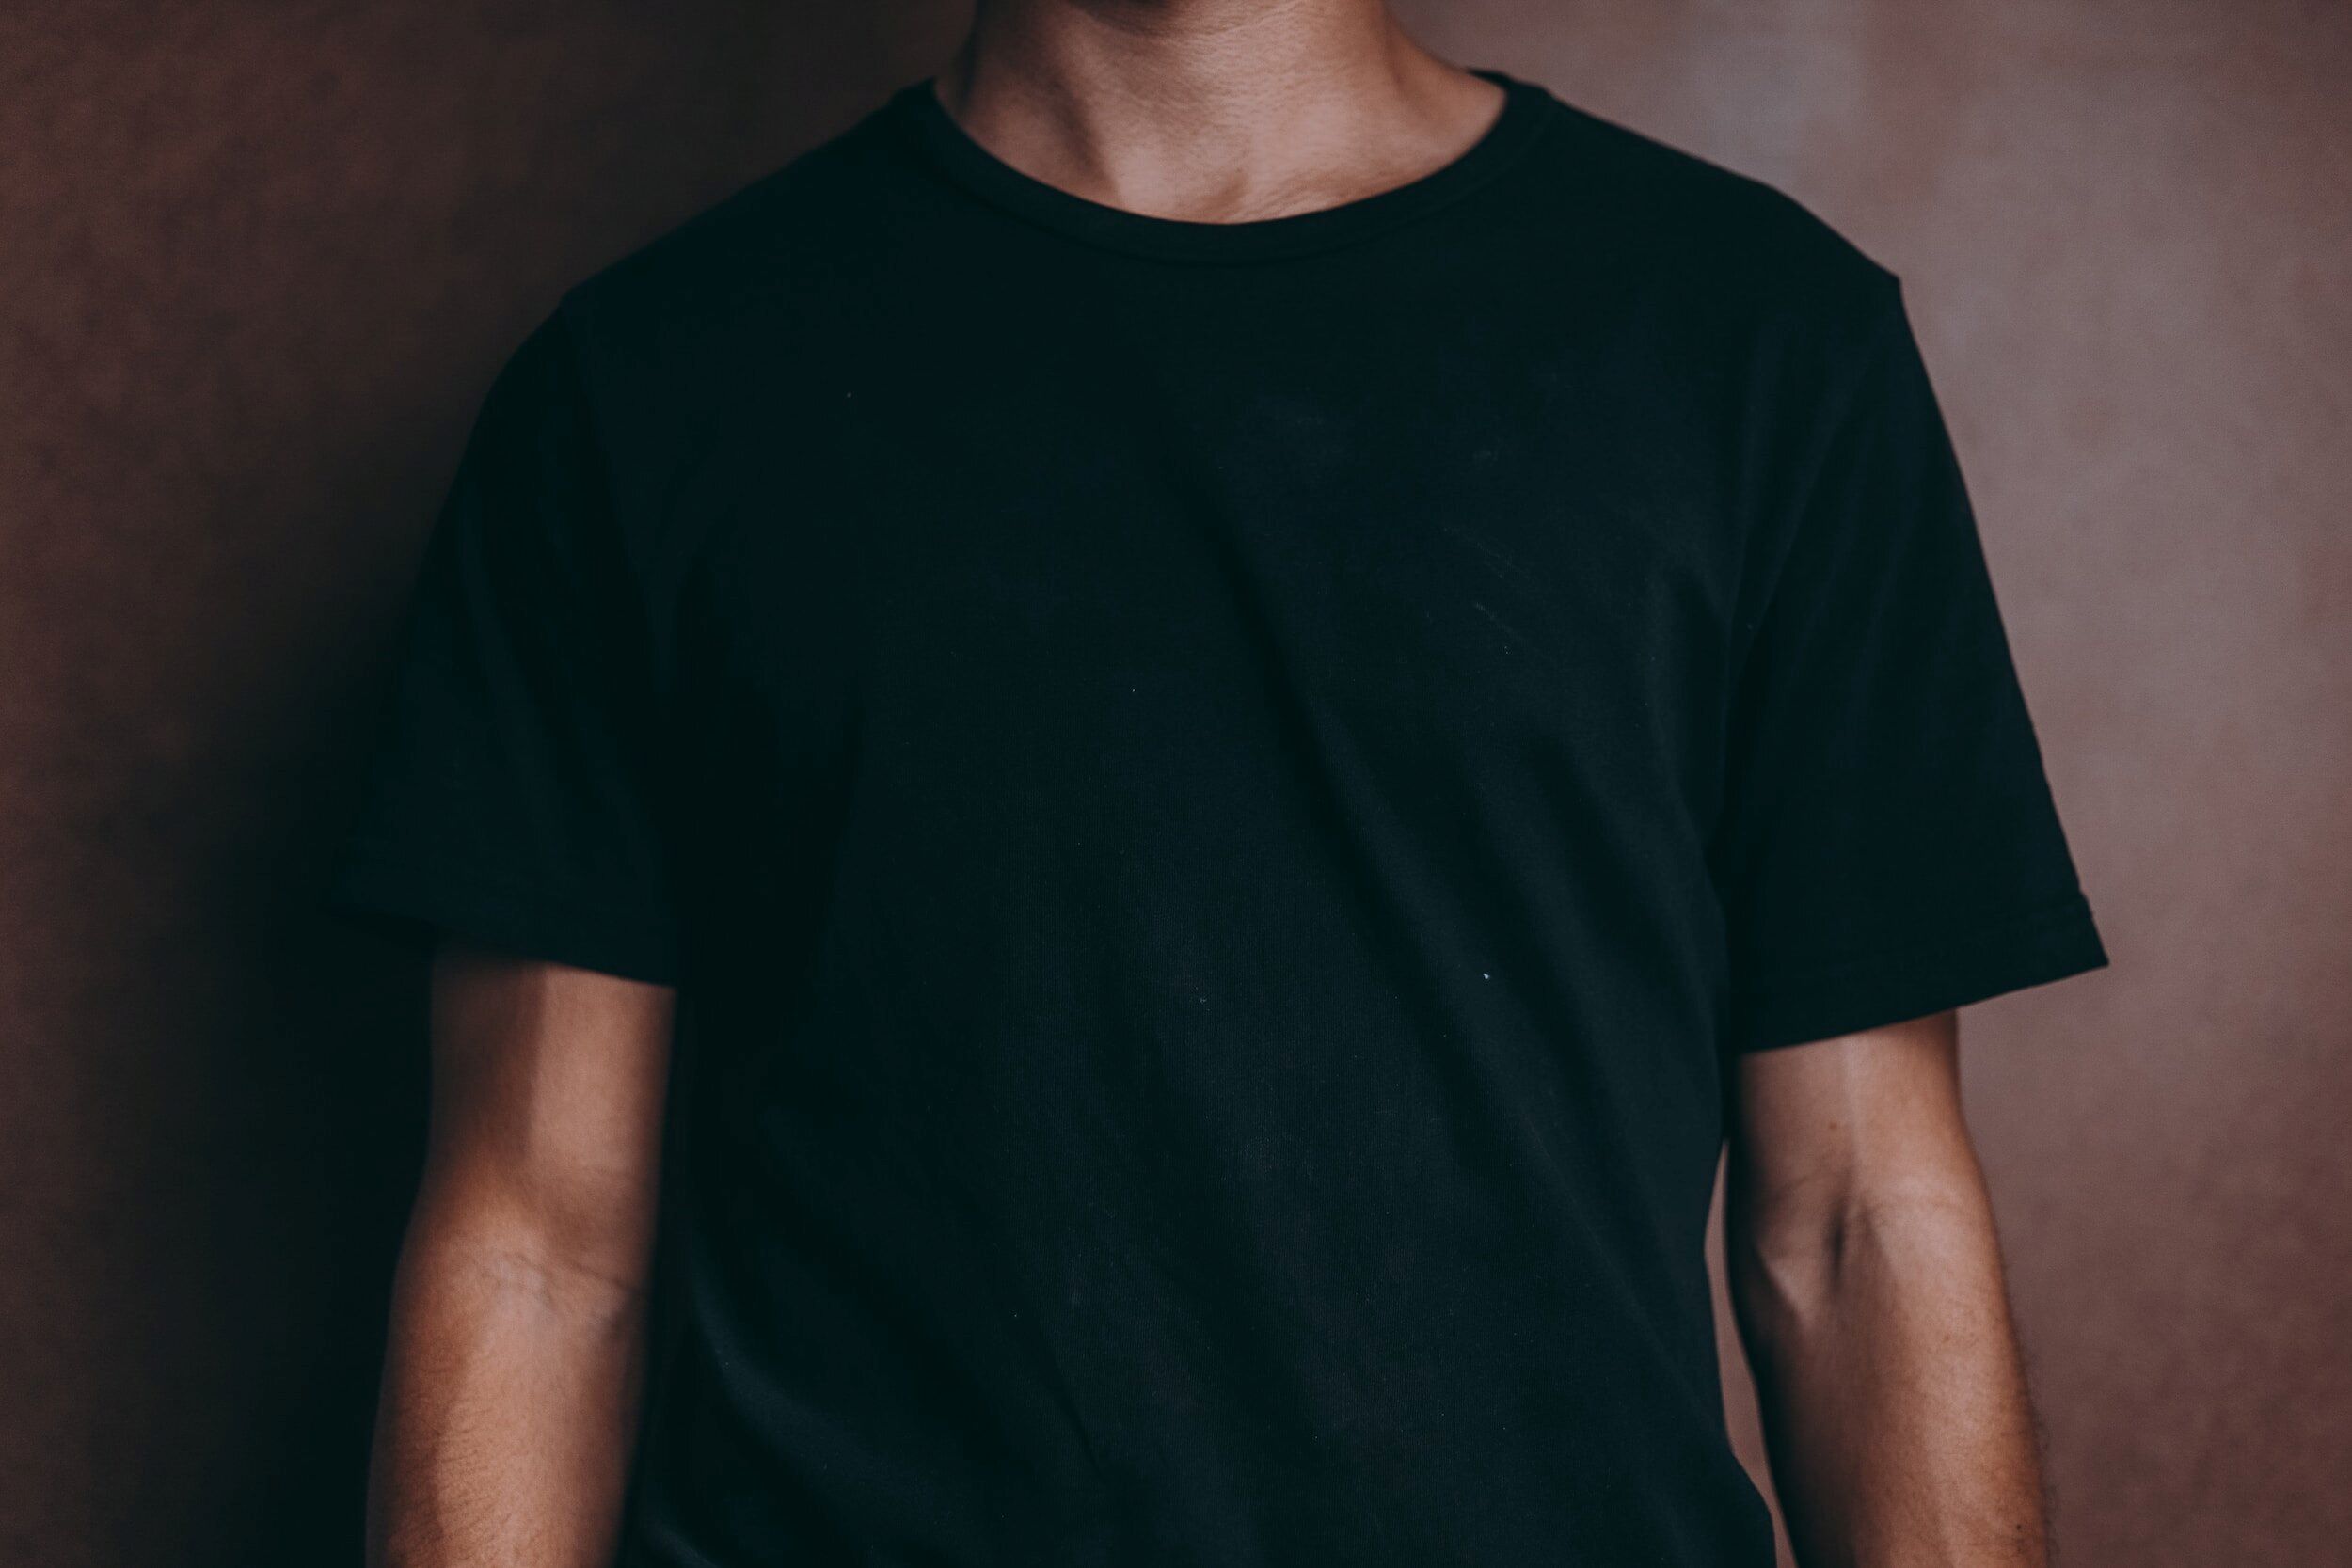 Discover The Best Website For Minimalist Black T-Shirts With Simple Designs!